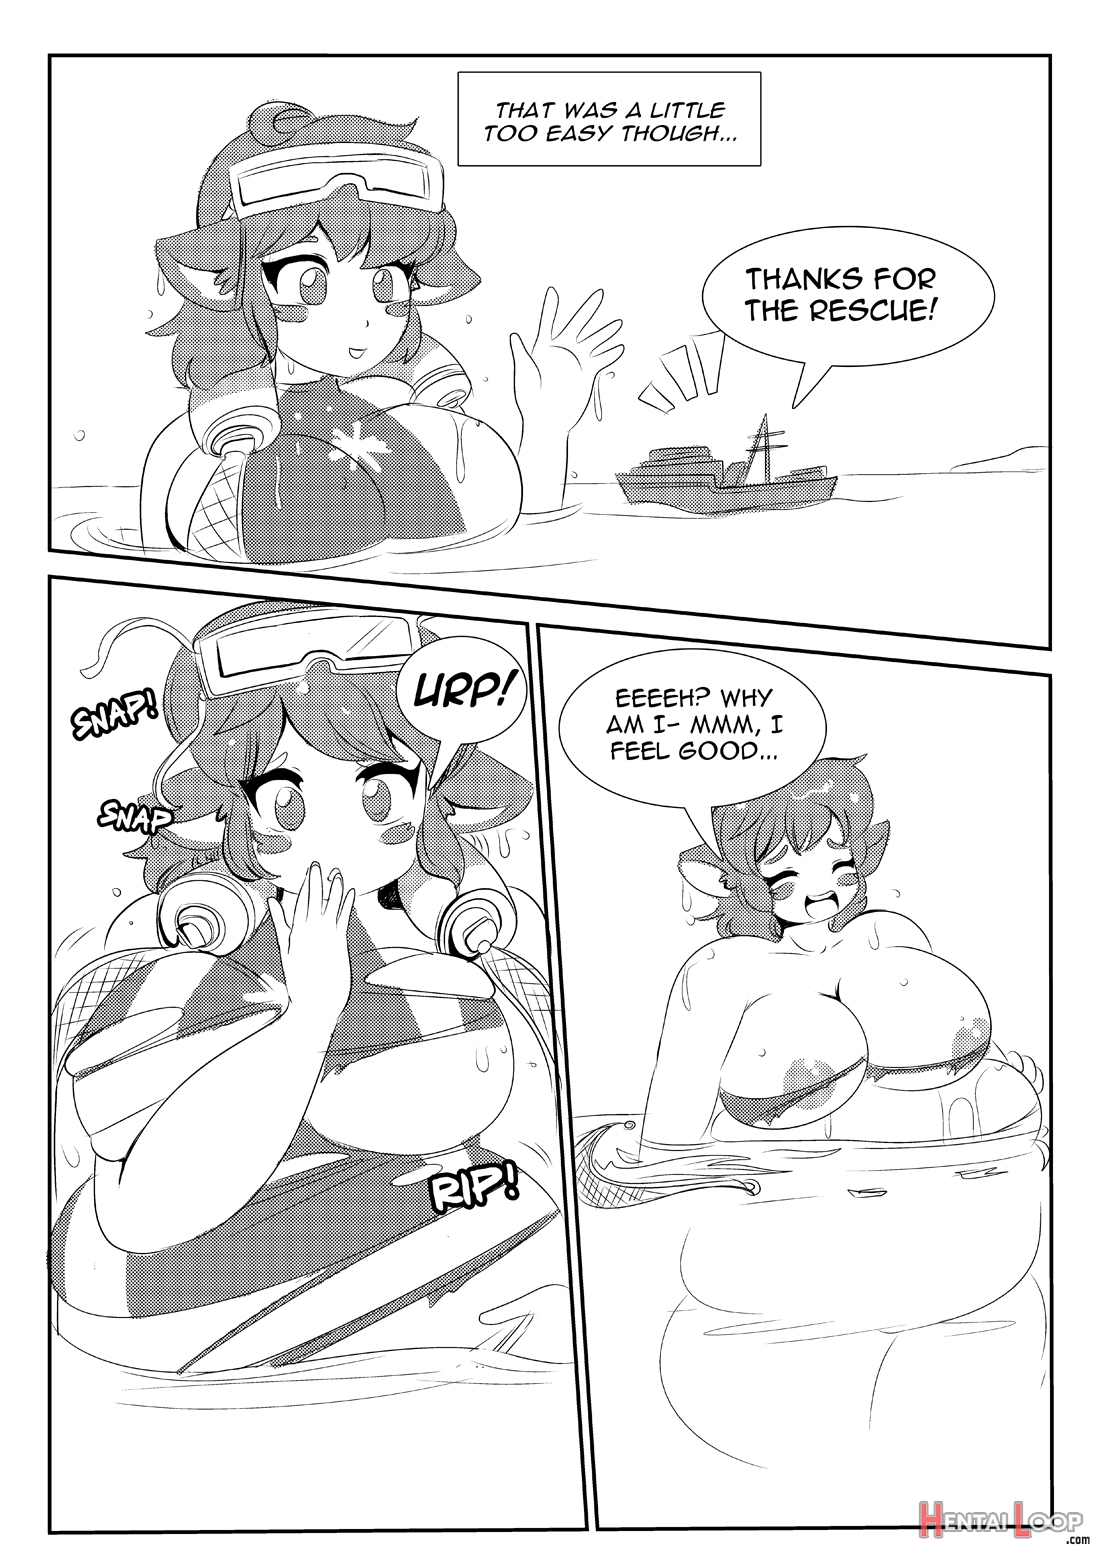 Shirley Saves The Day page 4